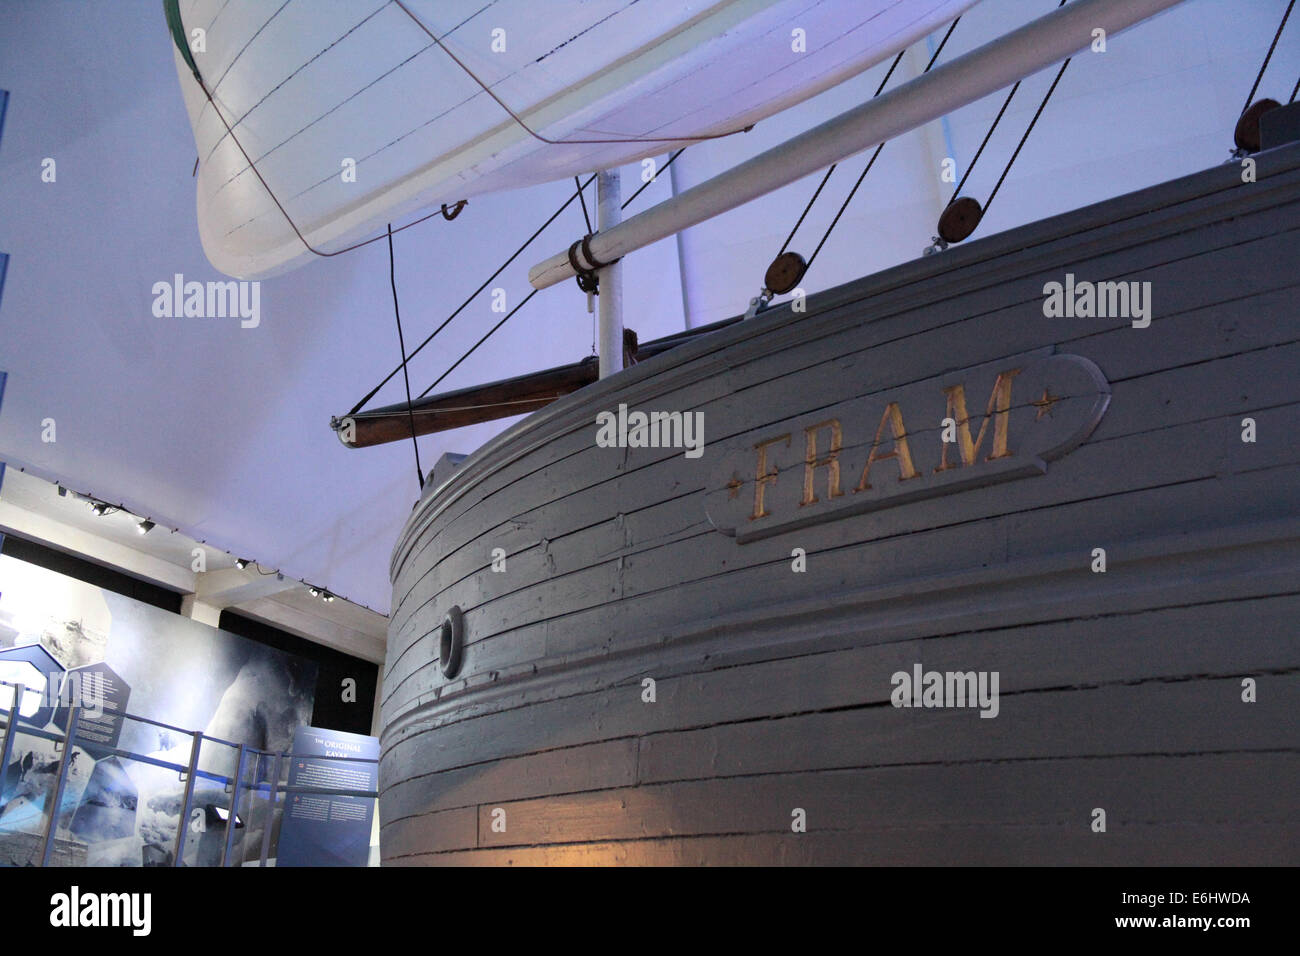 FRAM Polar Expedition Ship in the Norwegian Museum in Oslo Stock Photo